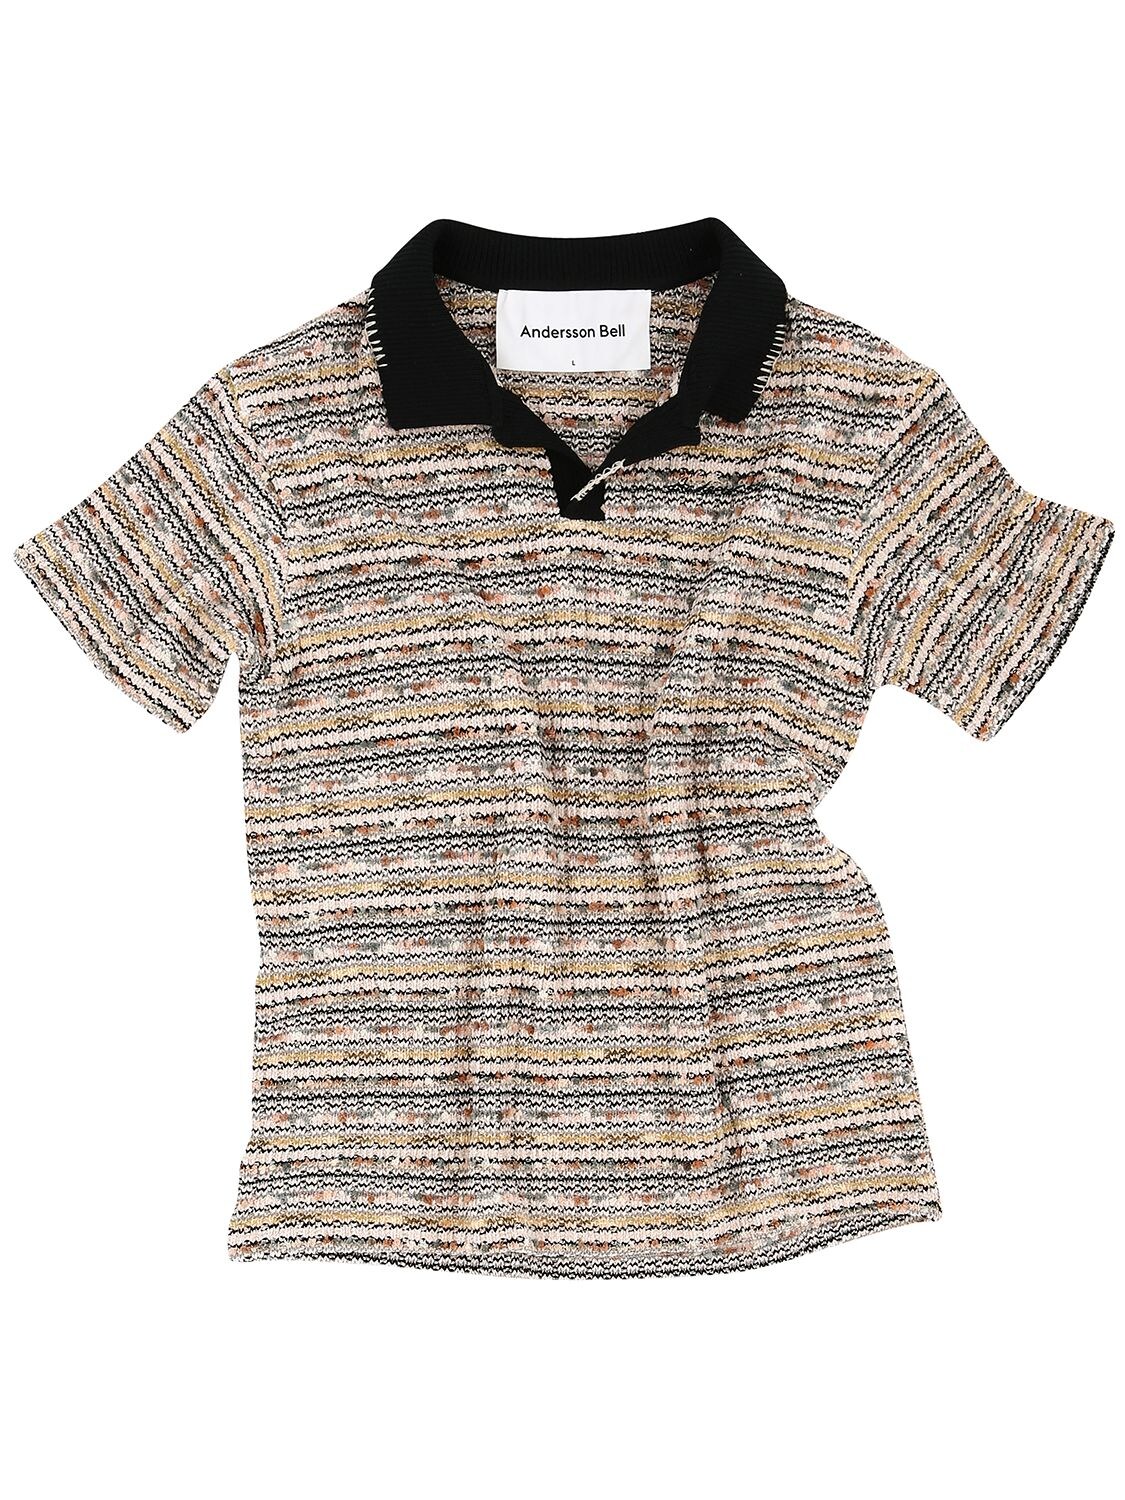 ANDERSSON BELL BOUCLÉ KNIT S/S POLO